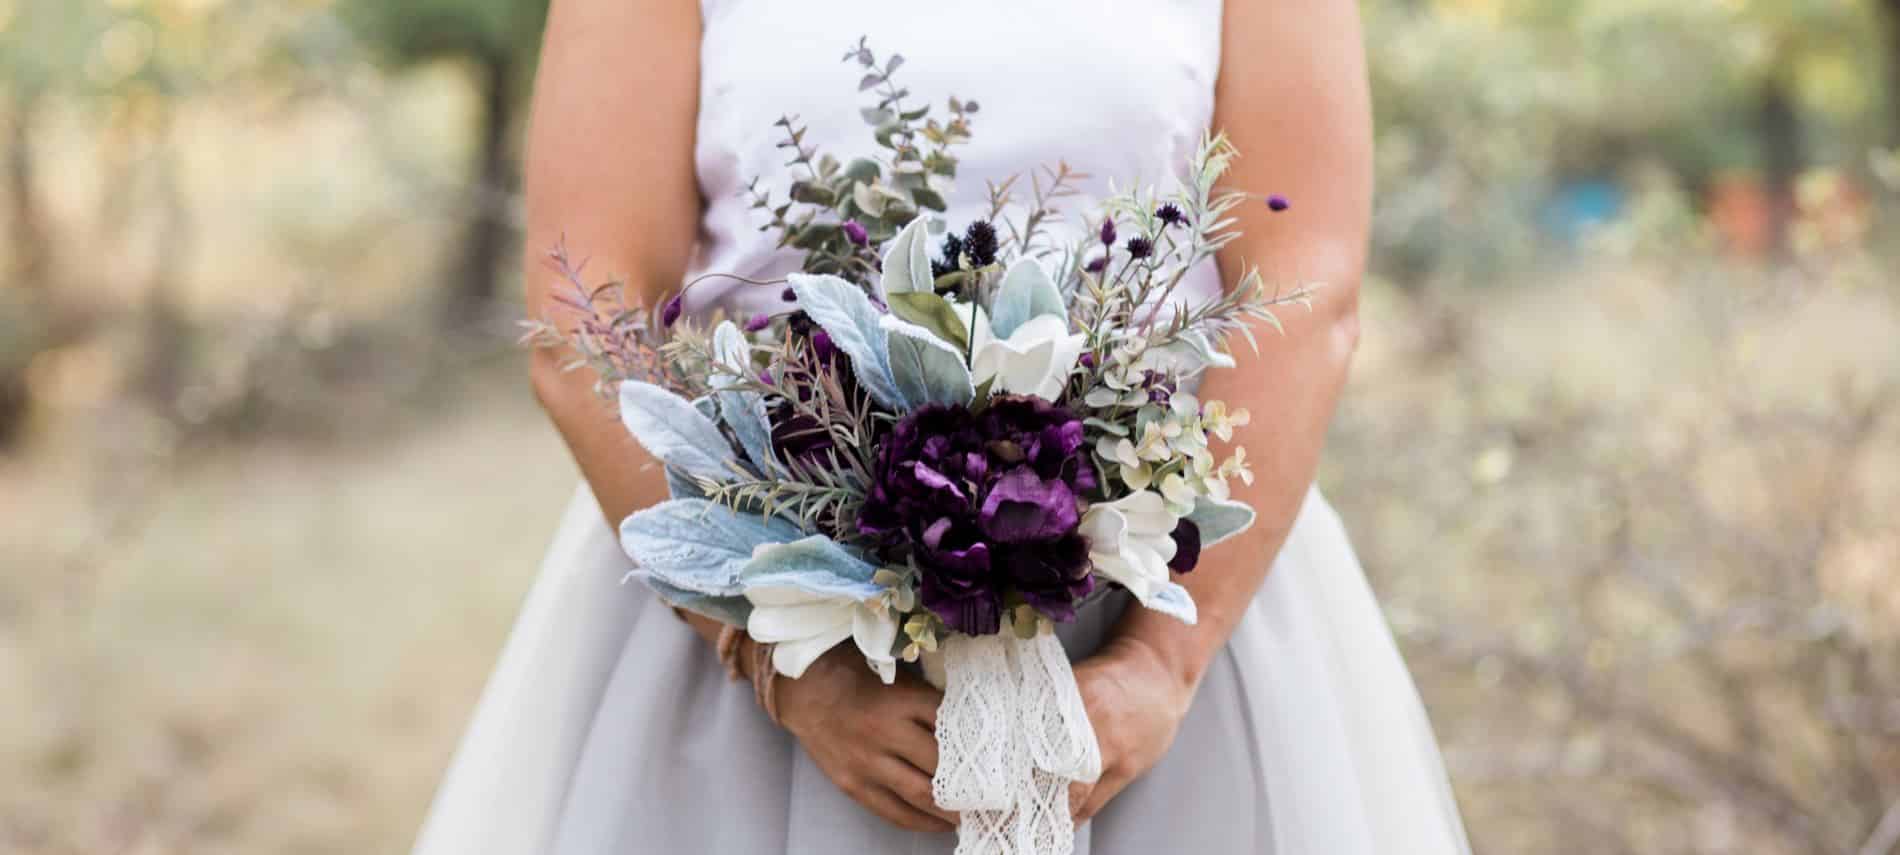 Partial view of a bride in white holding a white and burgundy floral bouquet